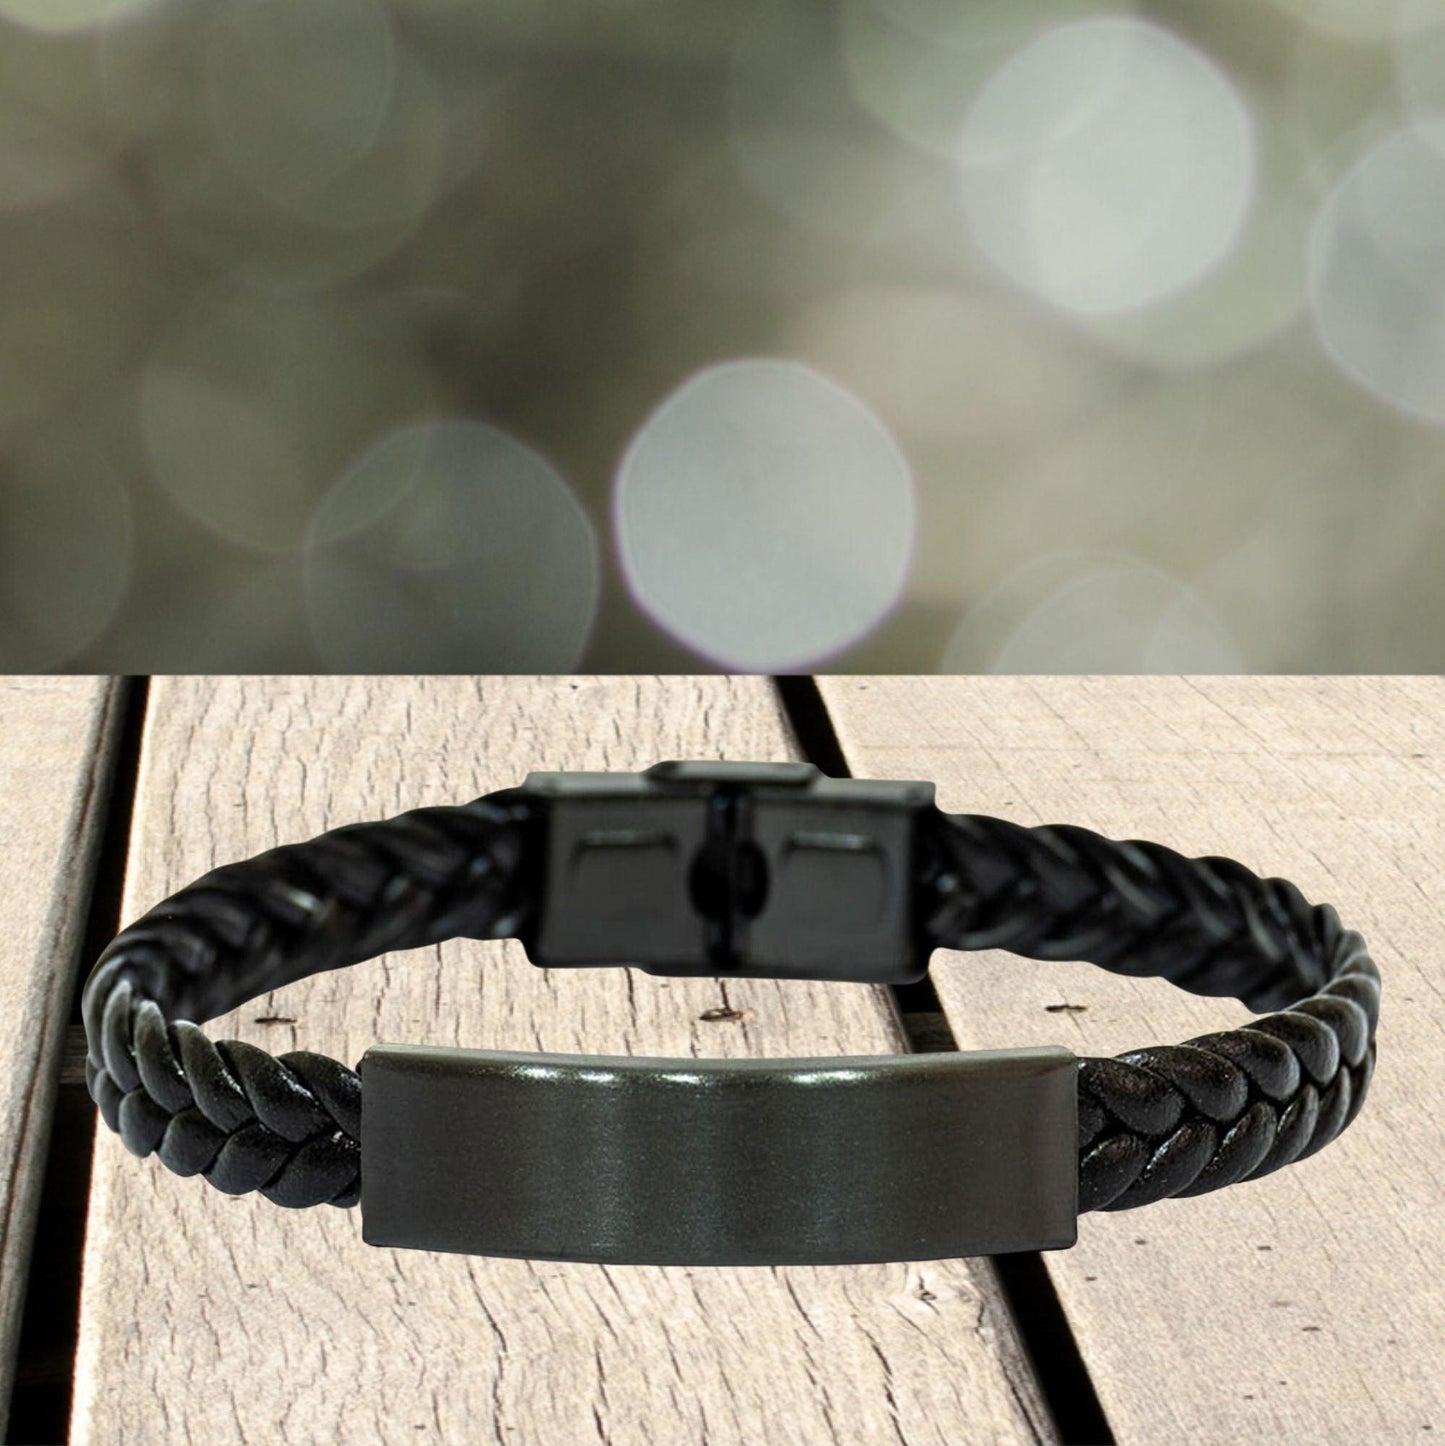 Sister Christmas Perfect Gifts, Sister Braided Leather Bracelet, Motivational Sister Engraved Gifts, Birthday Gifts For Sister, To My Sister Life is learning to dance in the rain, finding good in each day. I'm always with you - Mallard Moon Gift Shop